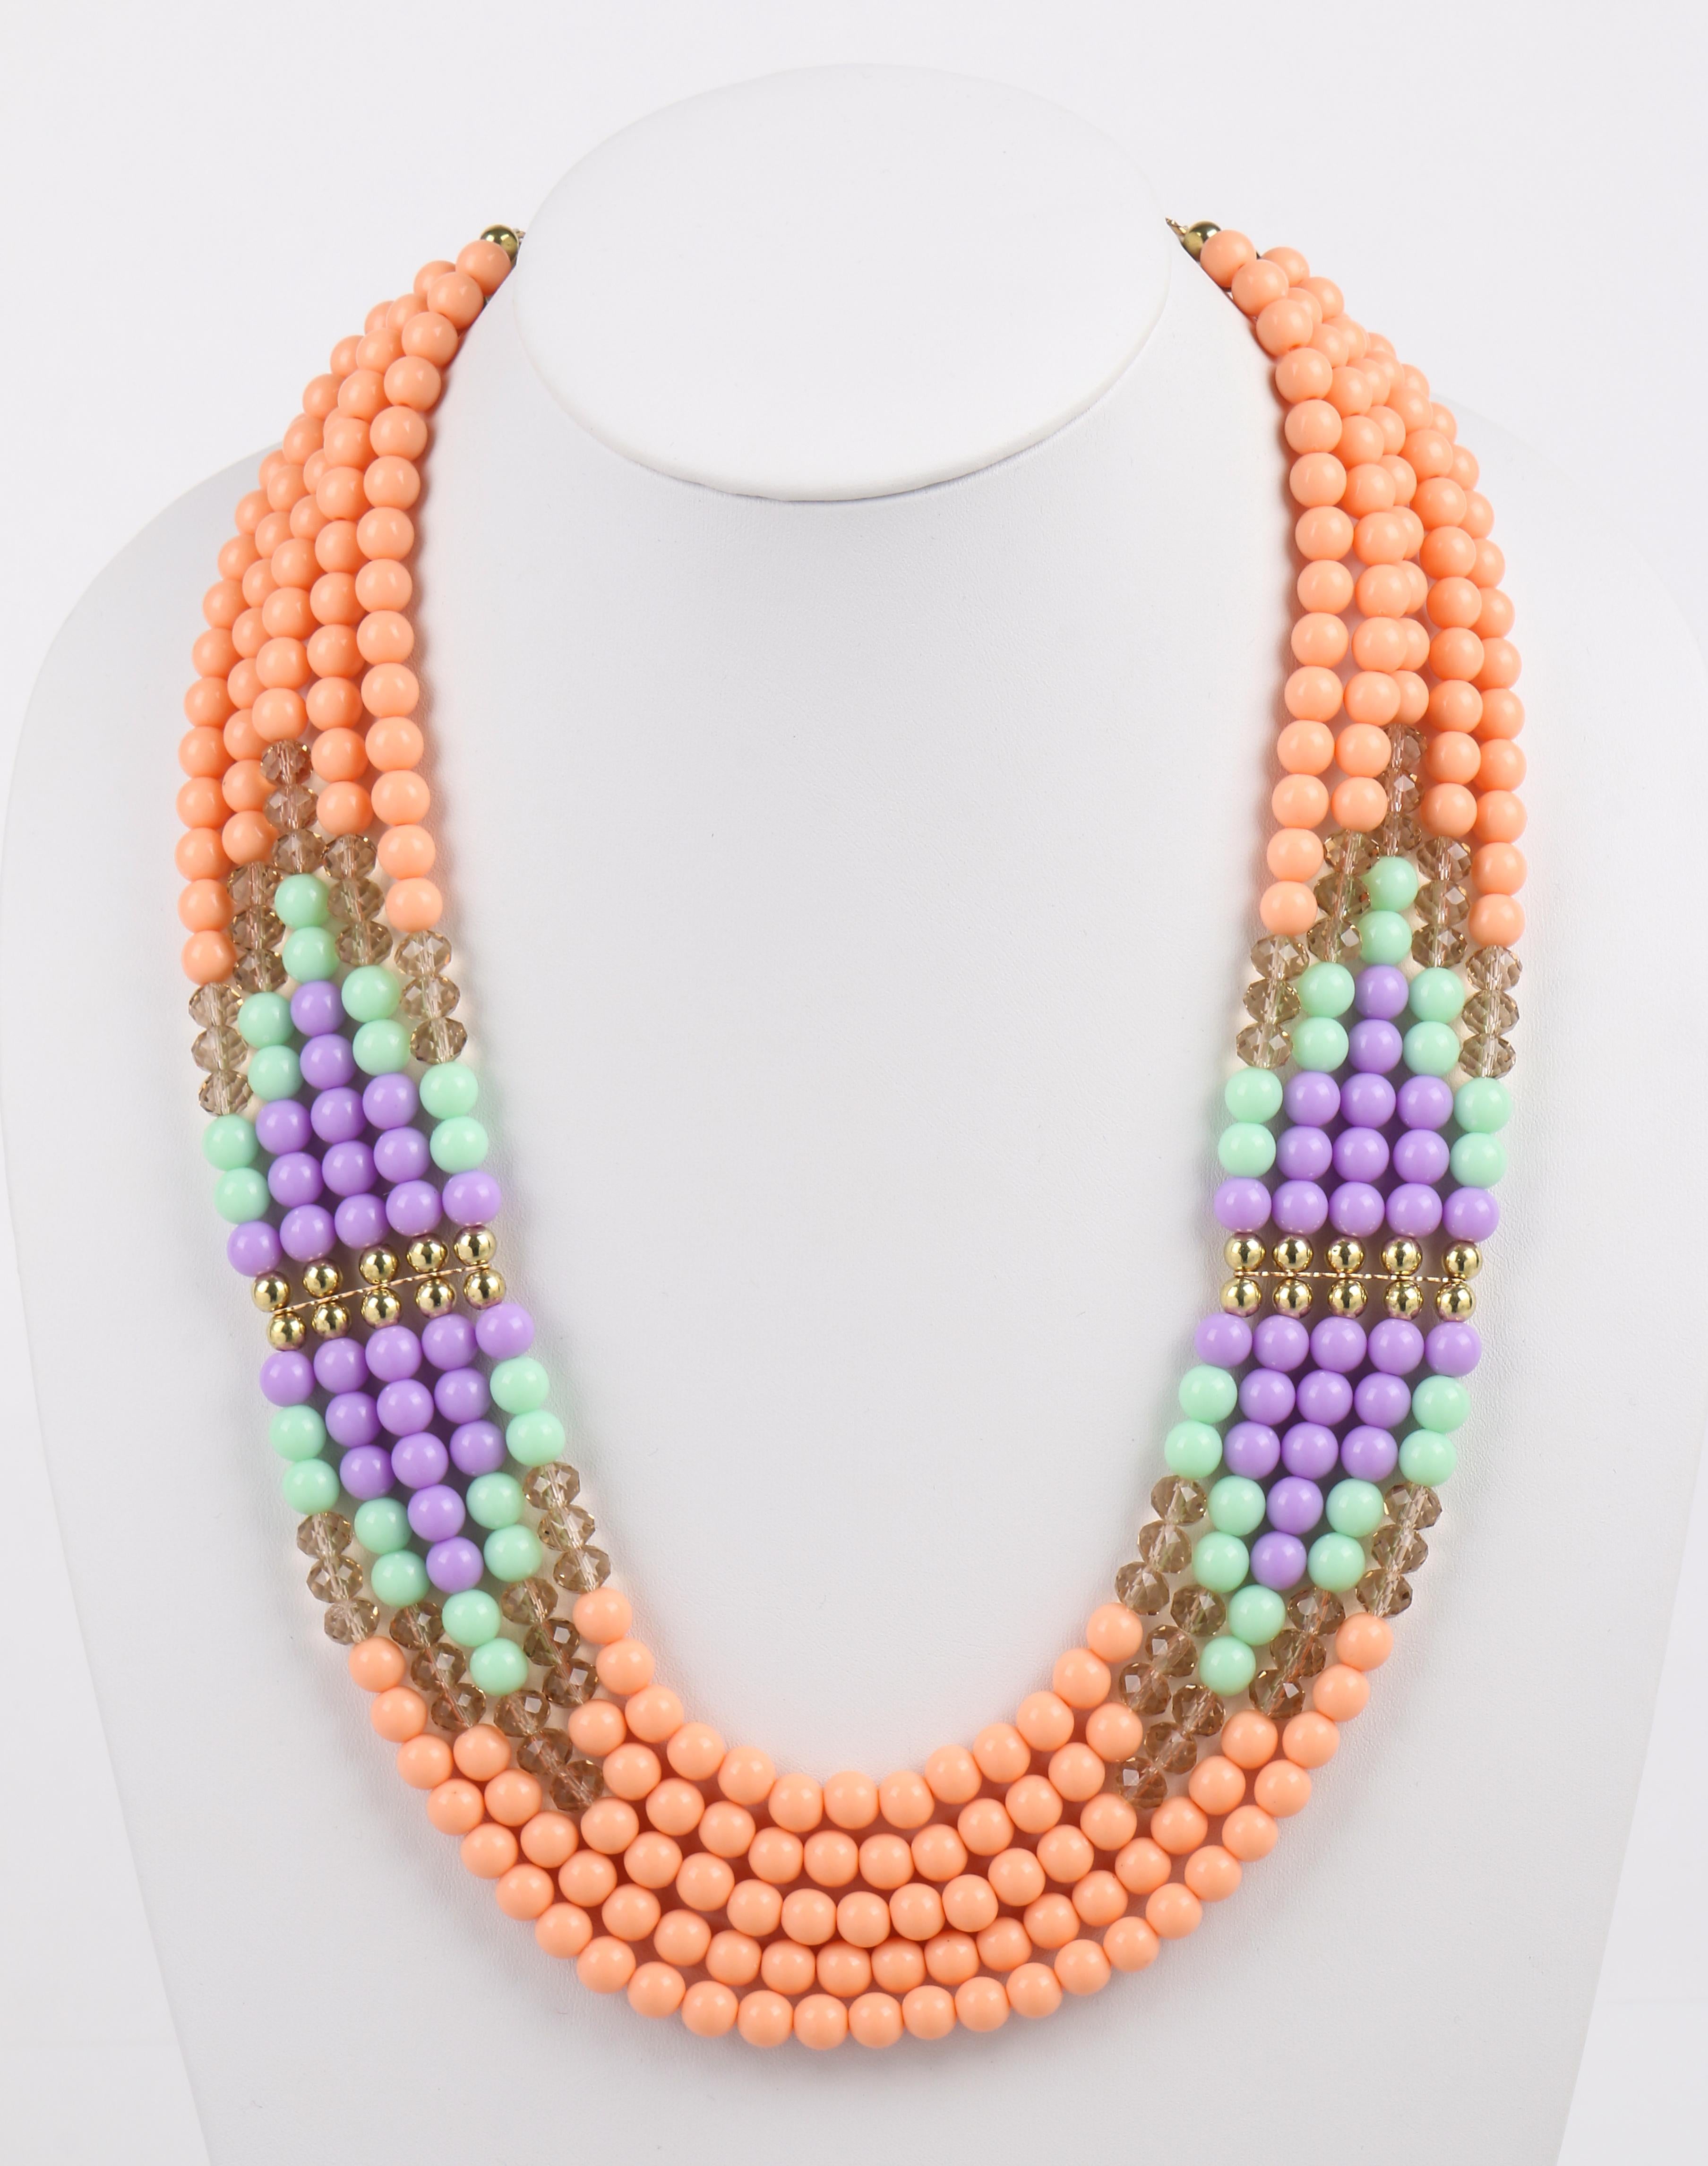 Vintage c.1980's Emilio Pucci (Coppola e Toppo) new old stock multicolored plastic lucite bead multi strand statement collar necklace. Five beaded strands made of round pale peach, mint, purple, and faceted smoky lucite / plastic beads (all